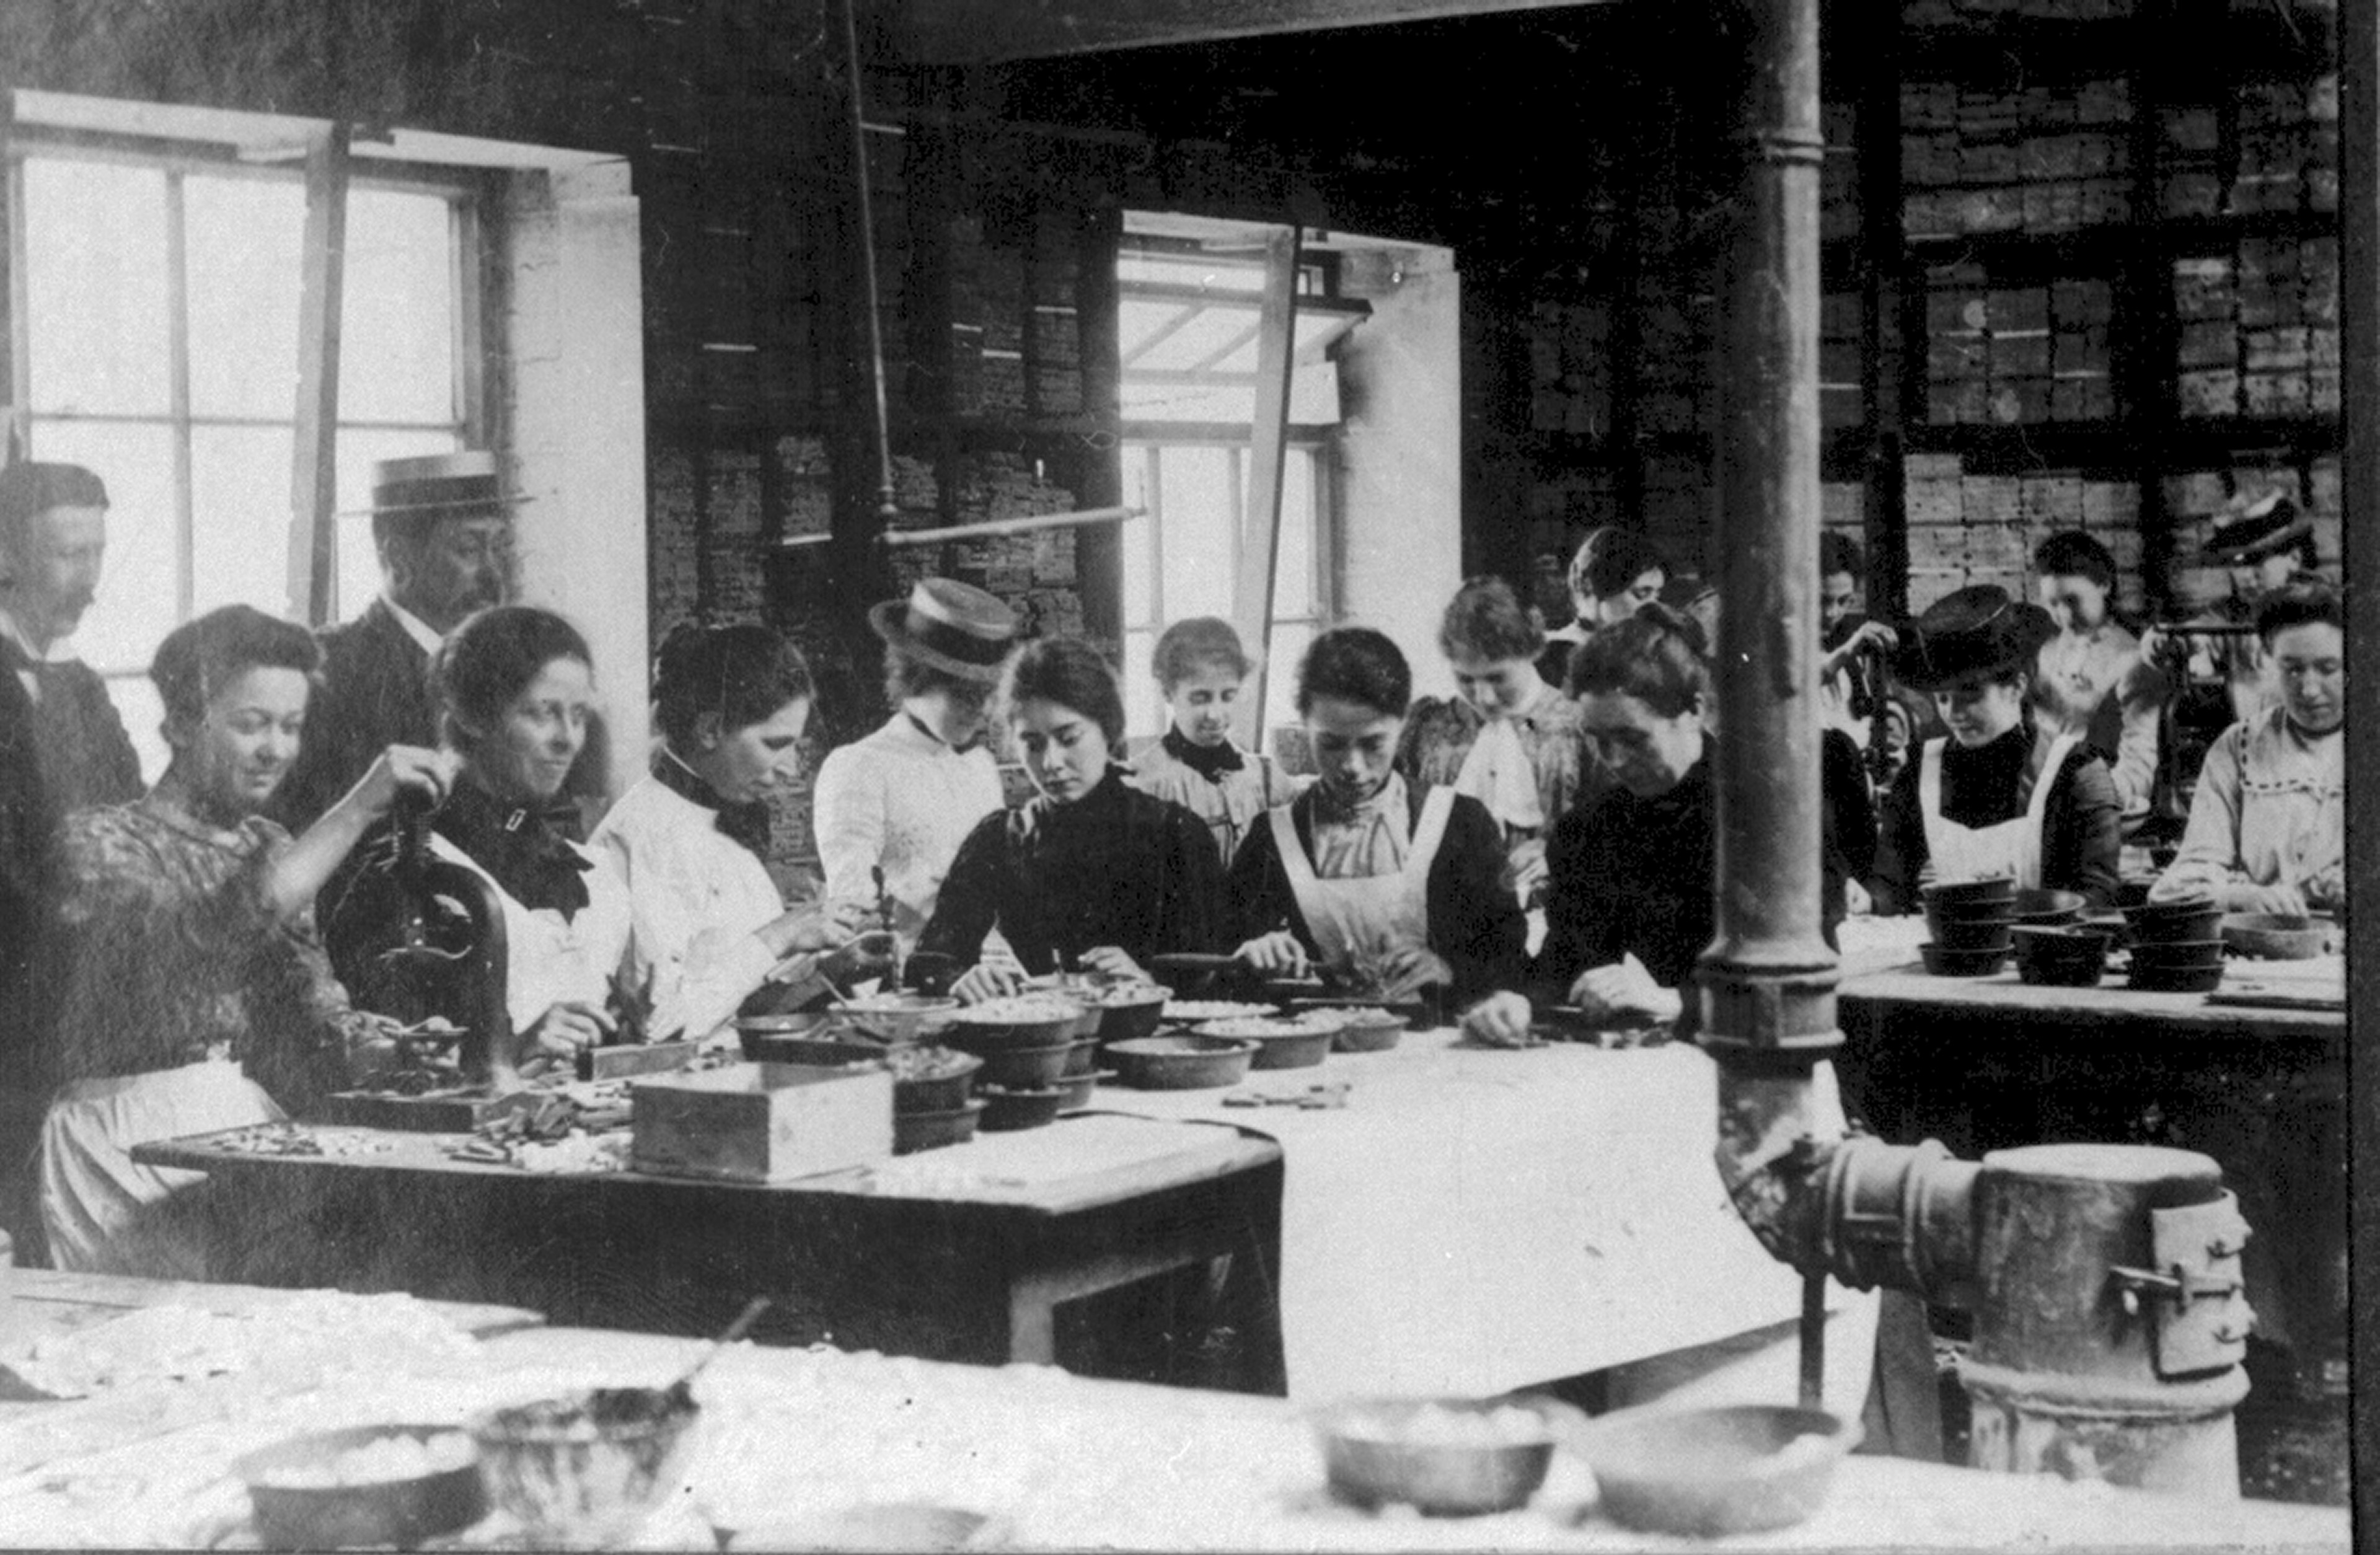 Workers making mosaics at Craven Dunnill & Co. Works, c.1901-1905.